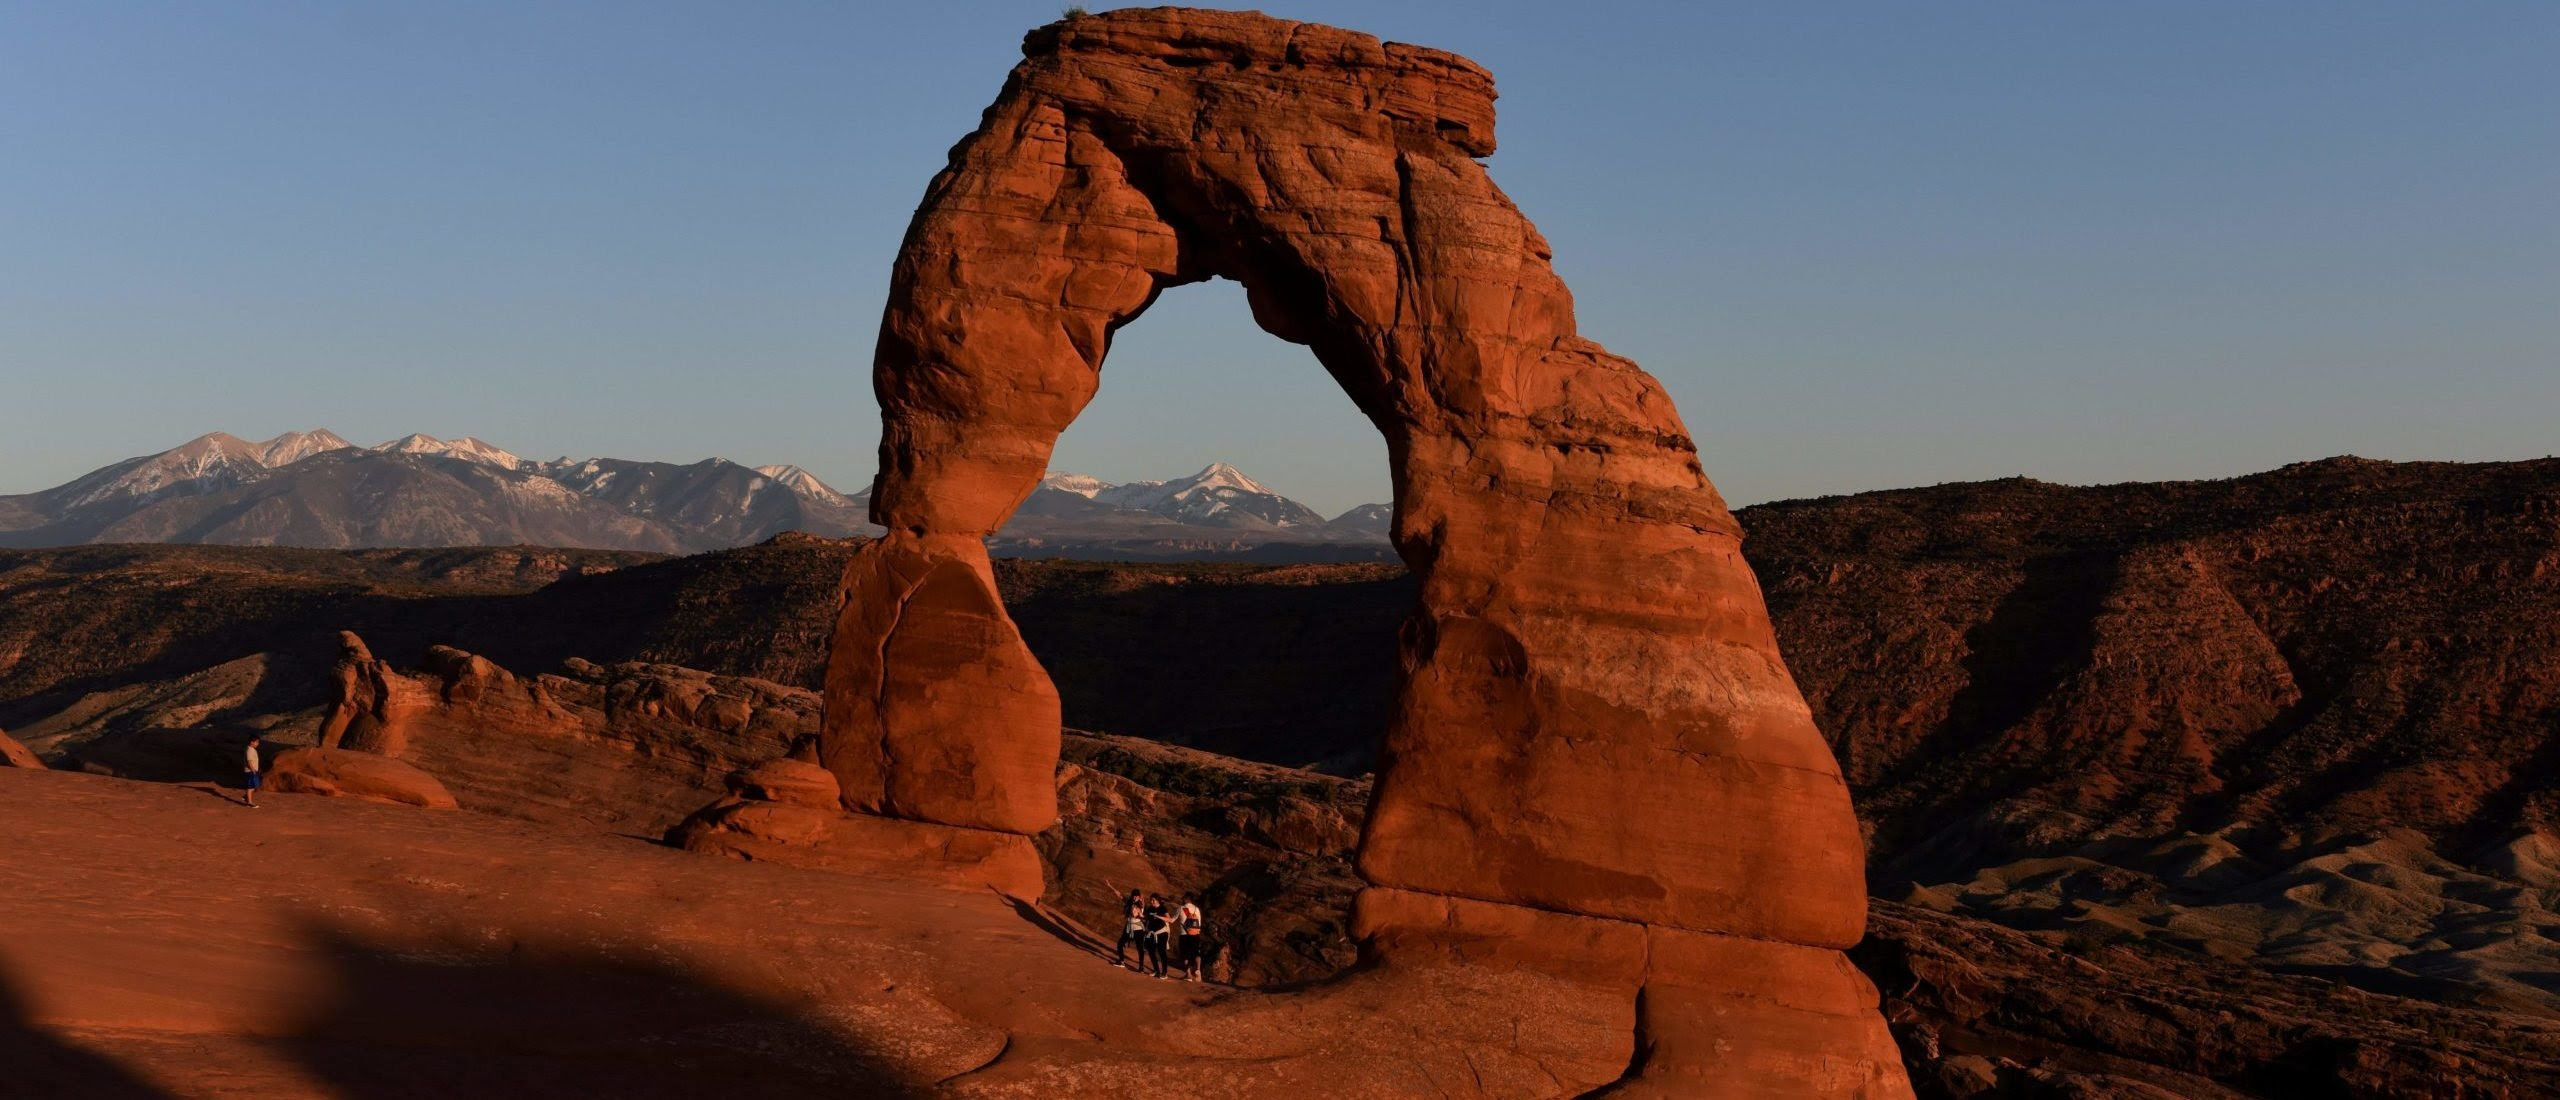 Government Awards Family Of Woman Decapitated At Arches National Park $10,000,000 In Lawsuit